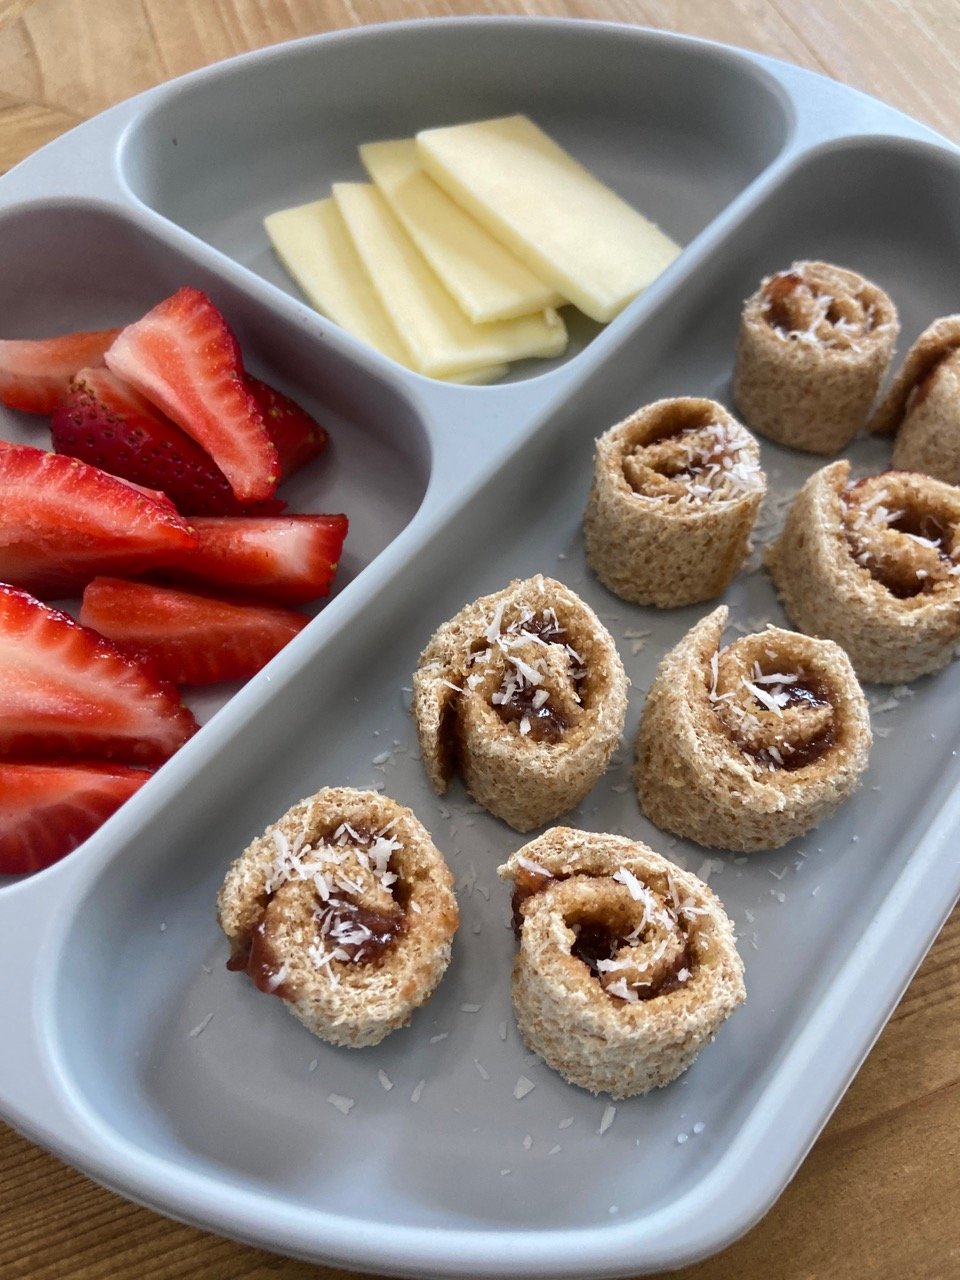 Peanut butter and jelly roll ups served with strawberries and cheese.